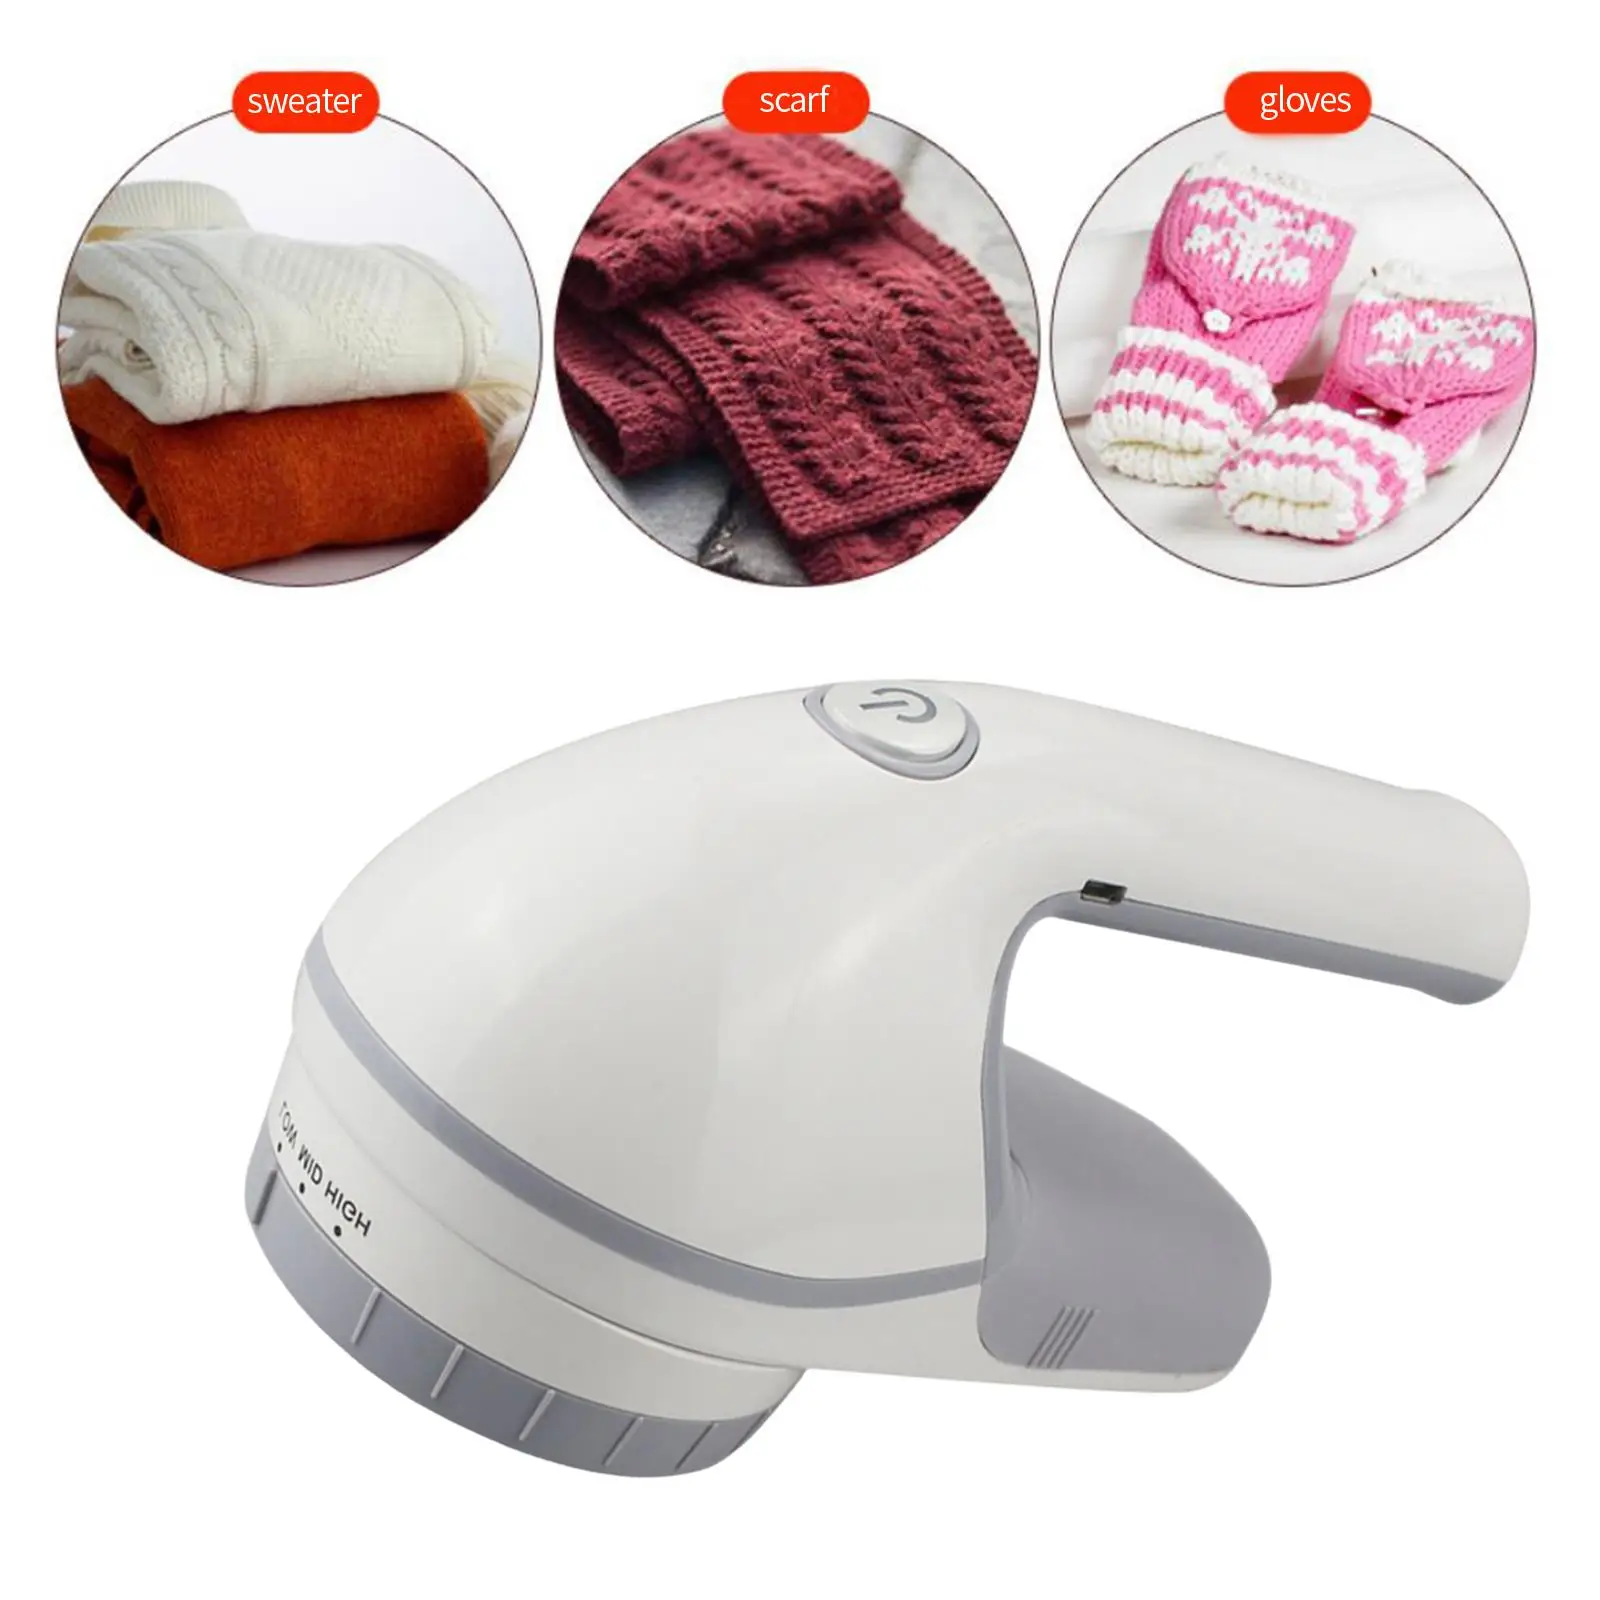 Compact Size Lint Remover Removal Sweater Shaver Rechargeable 6-Leaf Blade for Sweater Flannel Bedding Sheets Clothing Wool